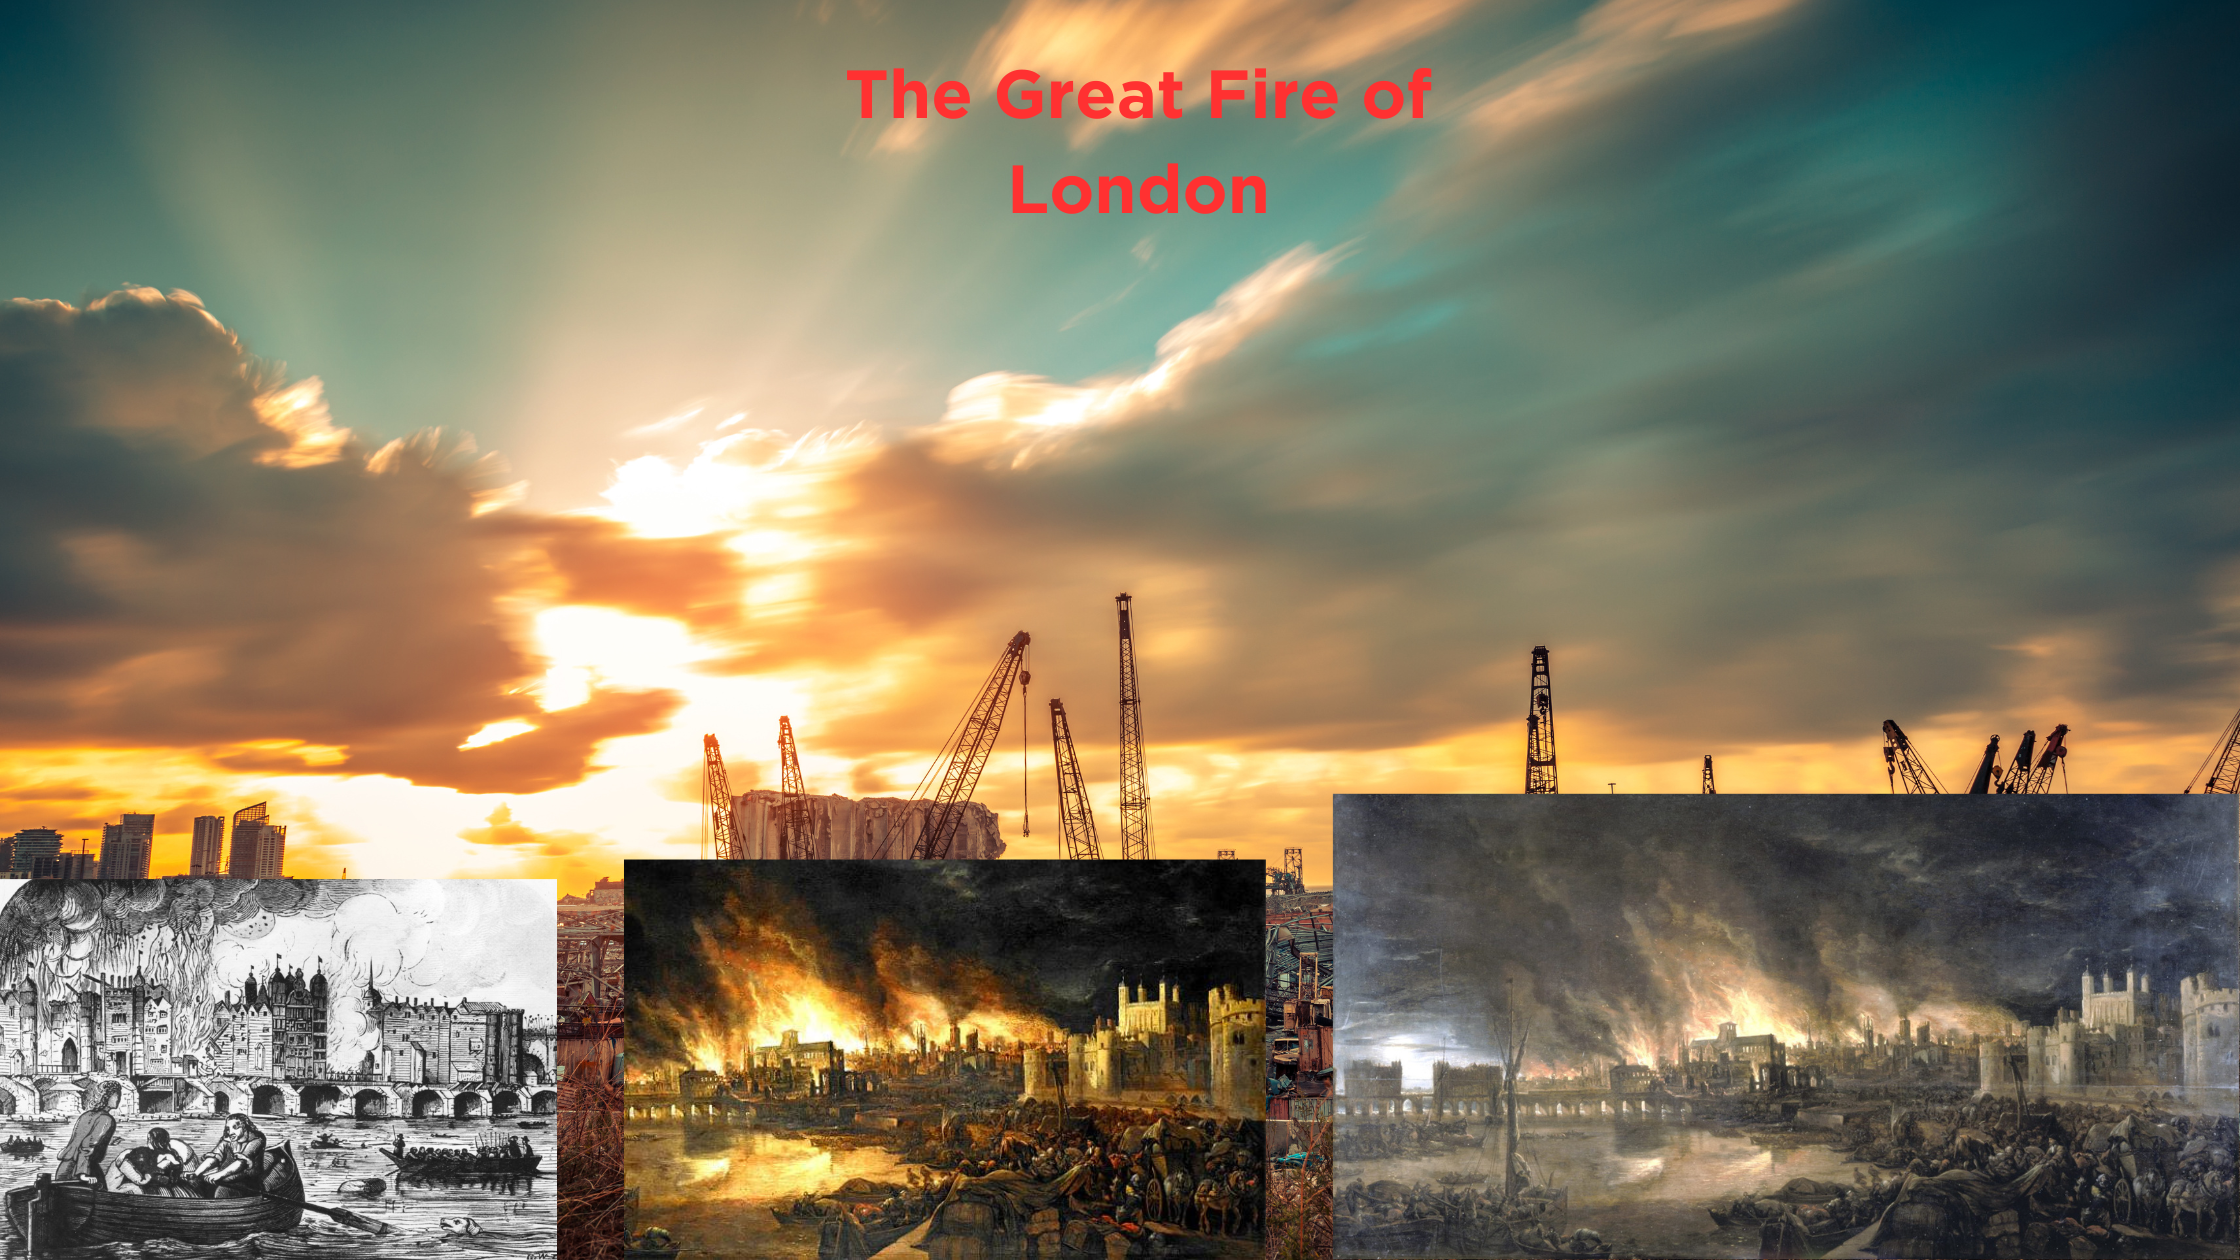 The Great Fire of London: Destruction and Rebuilding